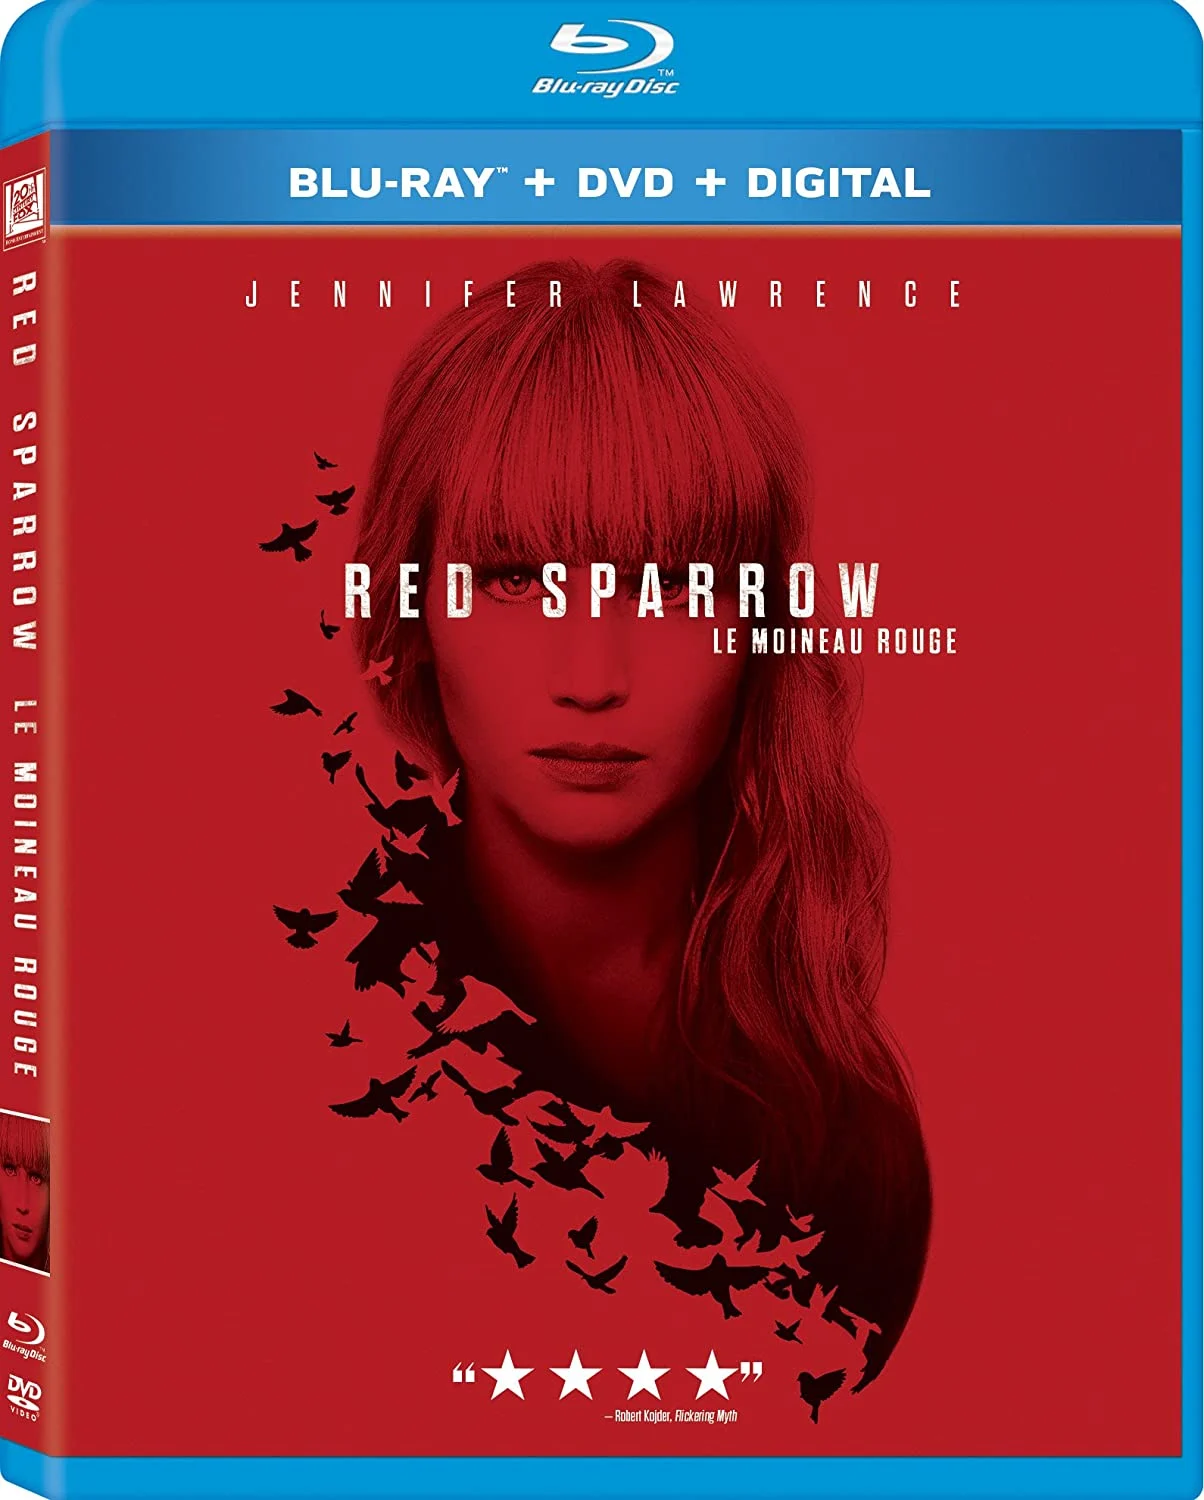 Red Sparrow (Blu-ray/DVD Combo) on MovieShack